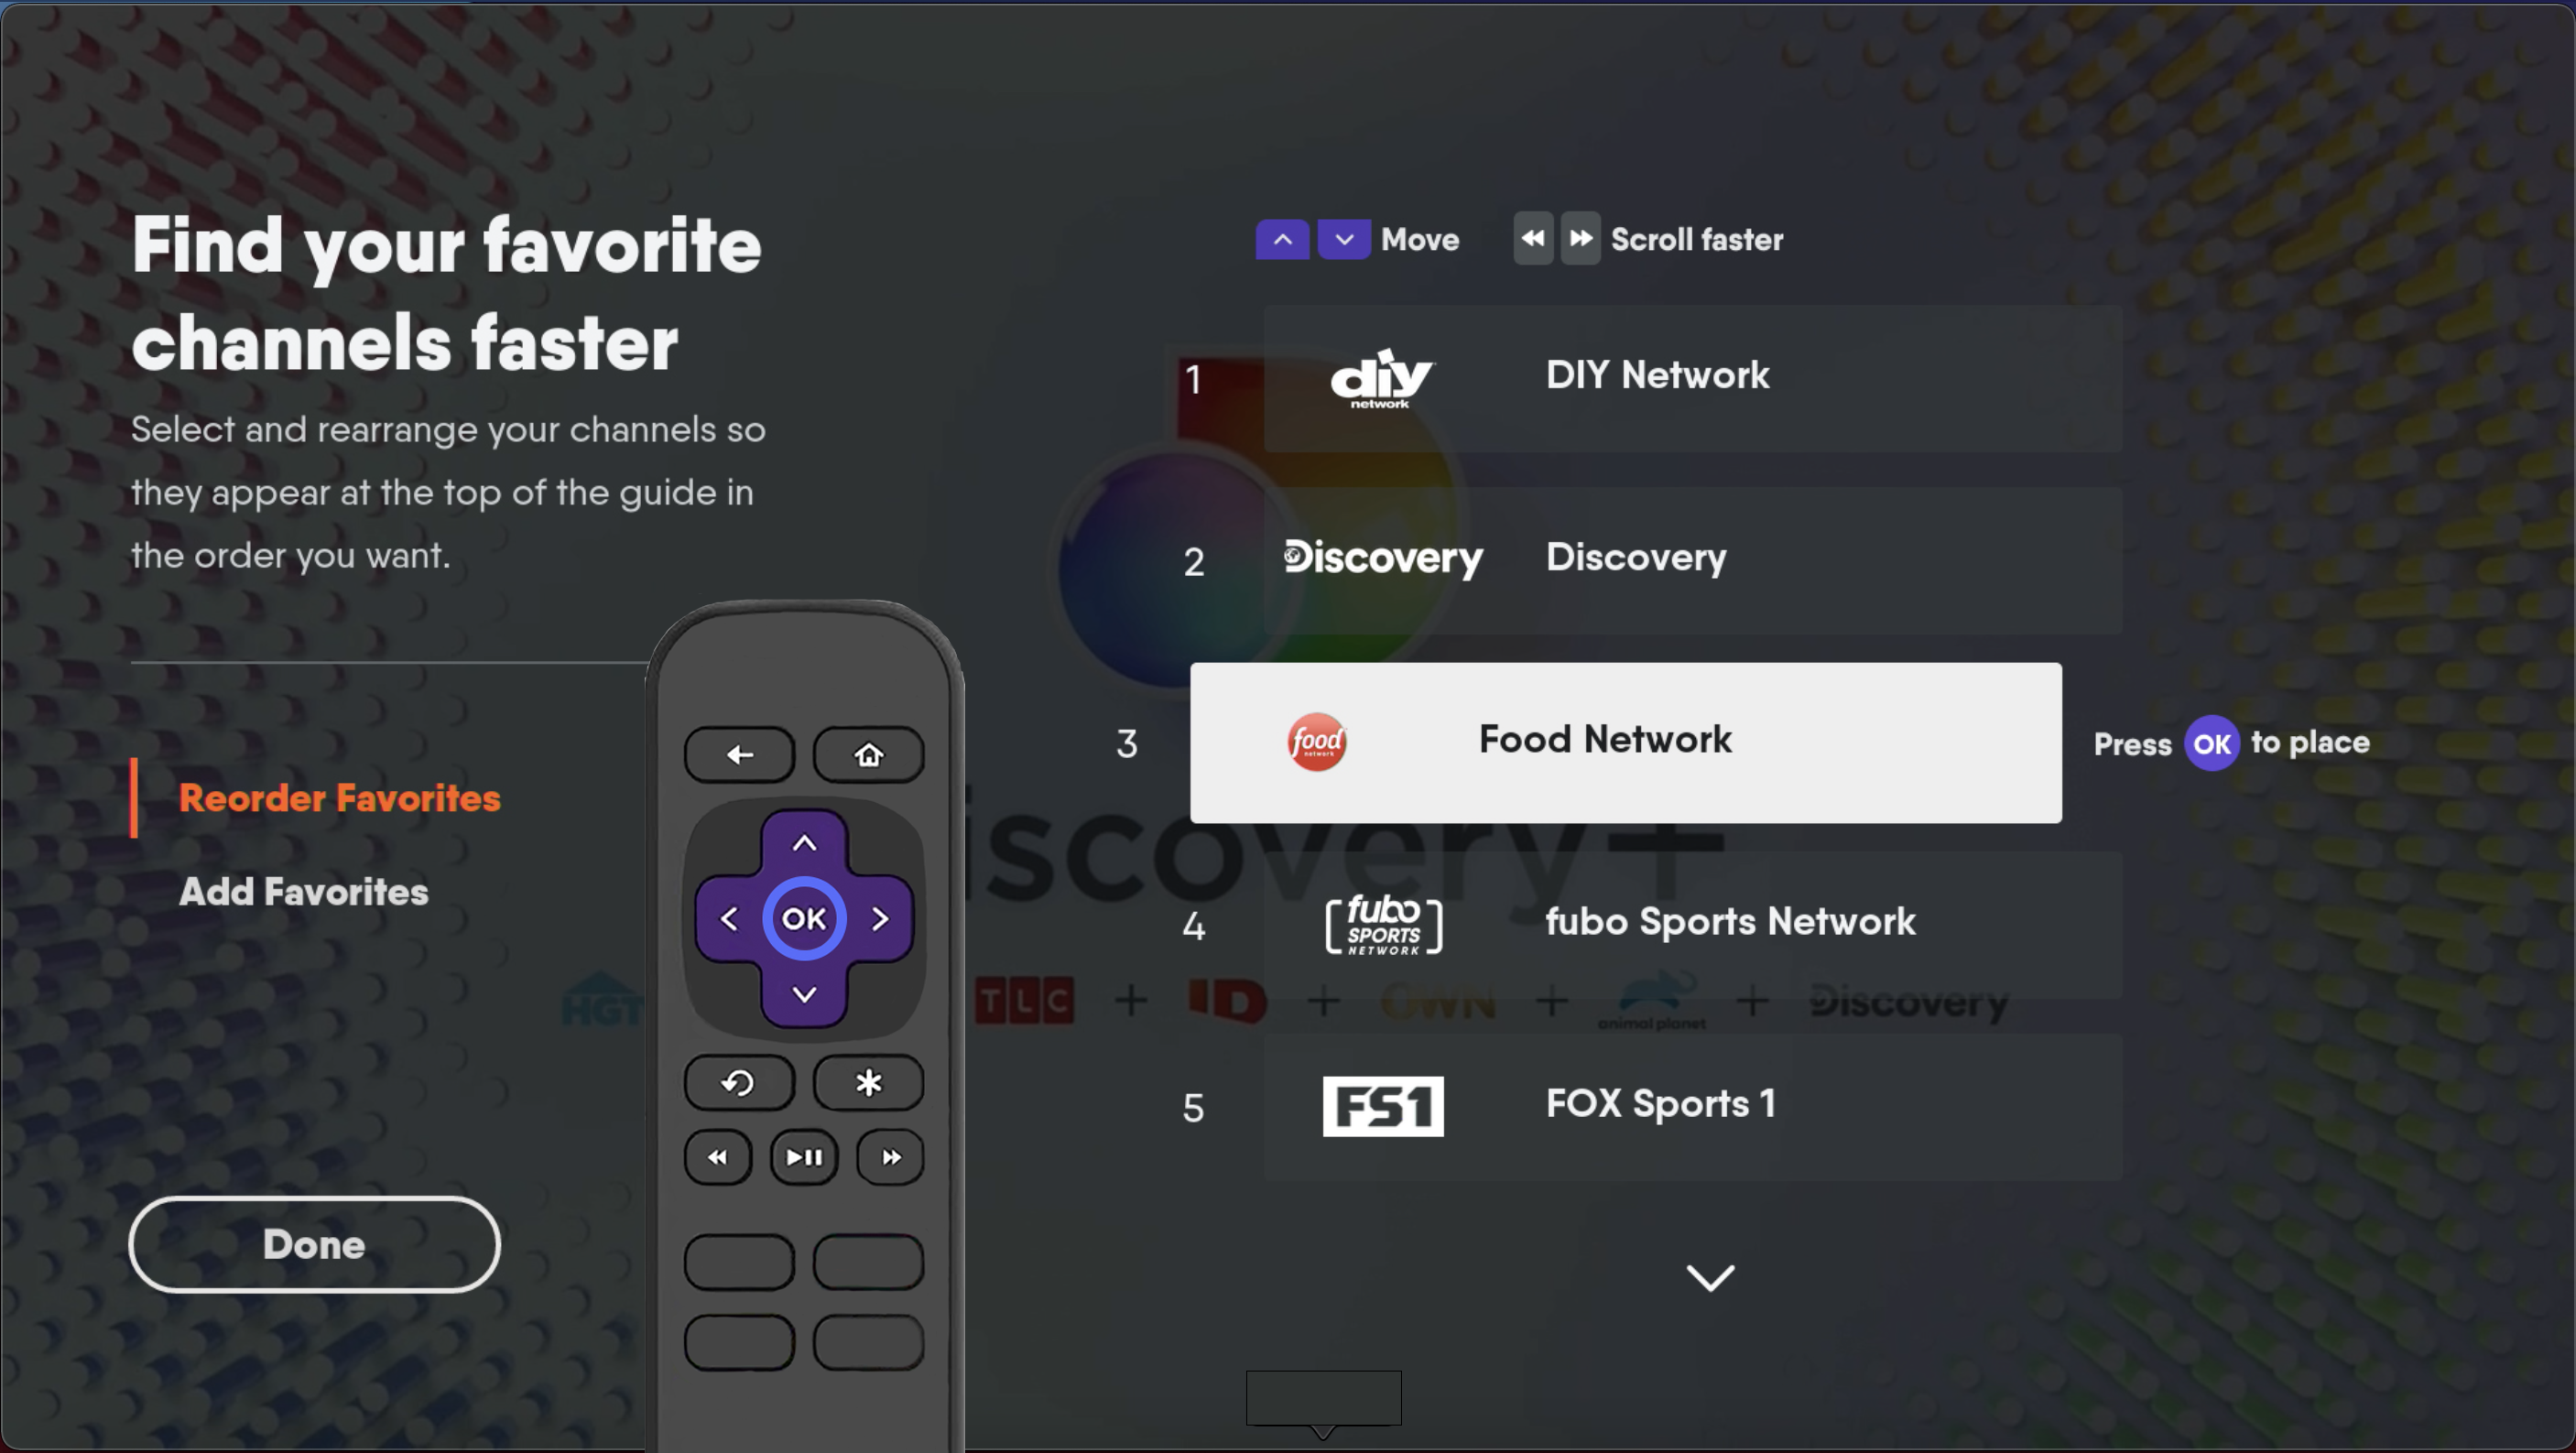 REORDER FAVORITES screen of the FuboTV app on Roku with a channel highlighted; press OK on remote to move